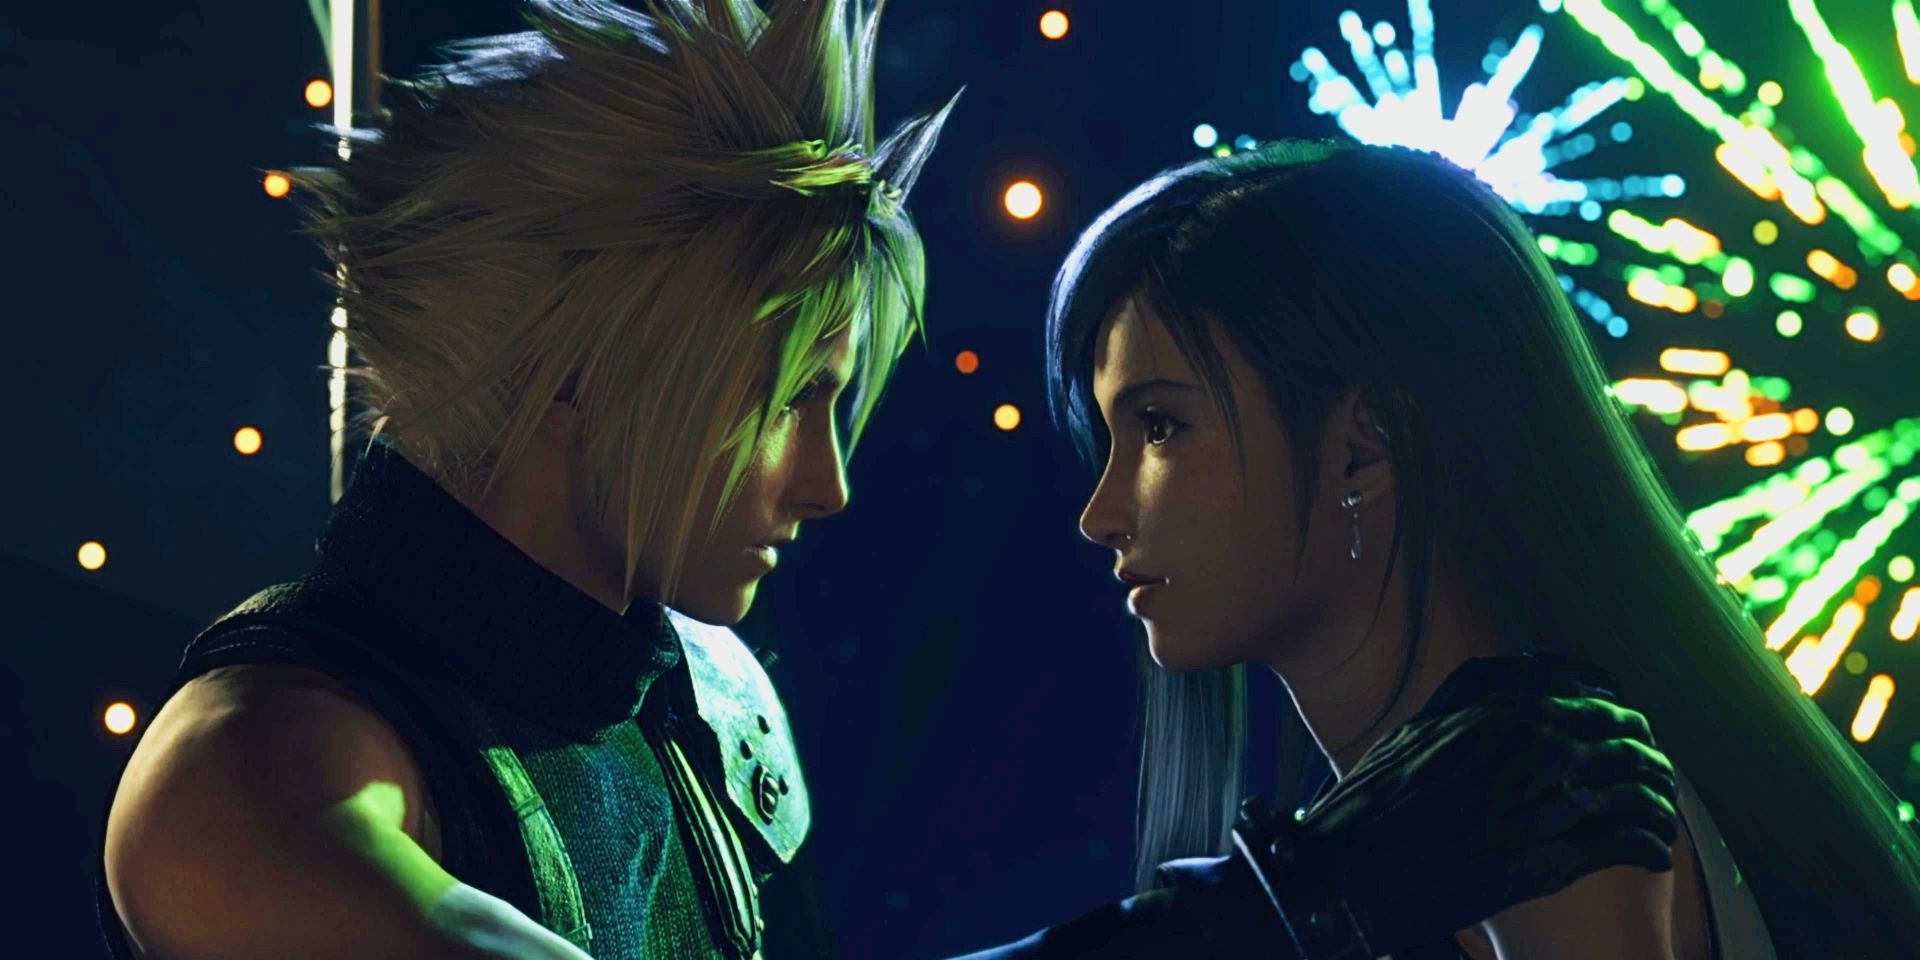 FF7 - Cloud and Tifa lean in for a kiss while multicolored fireworks appear outside